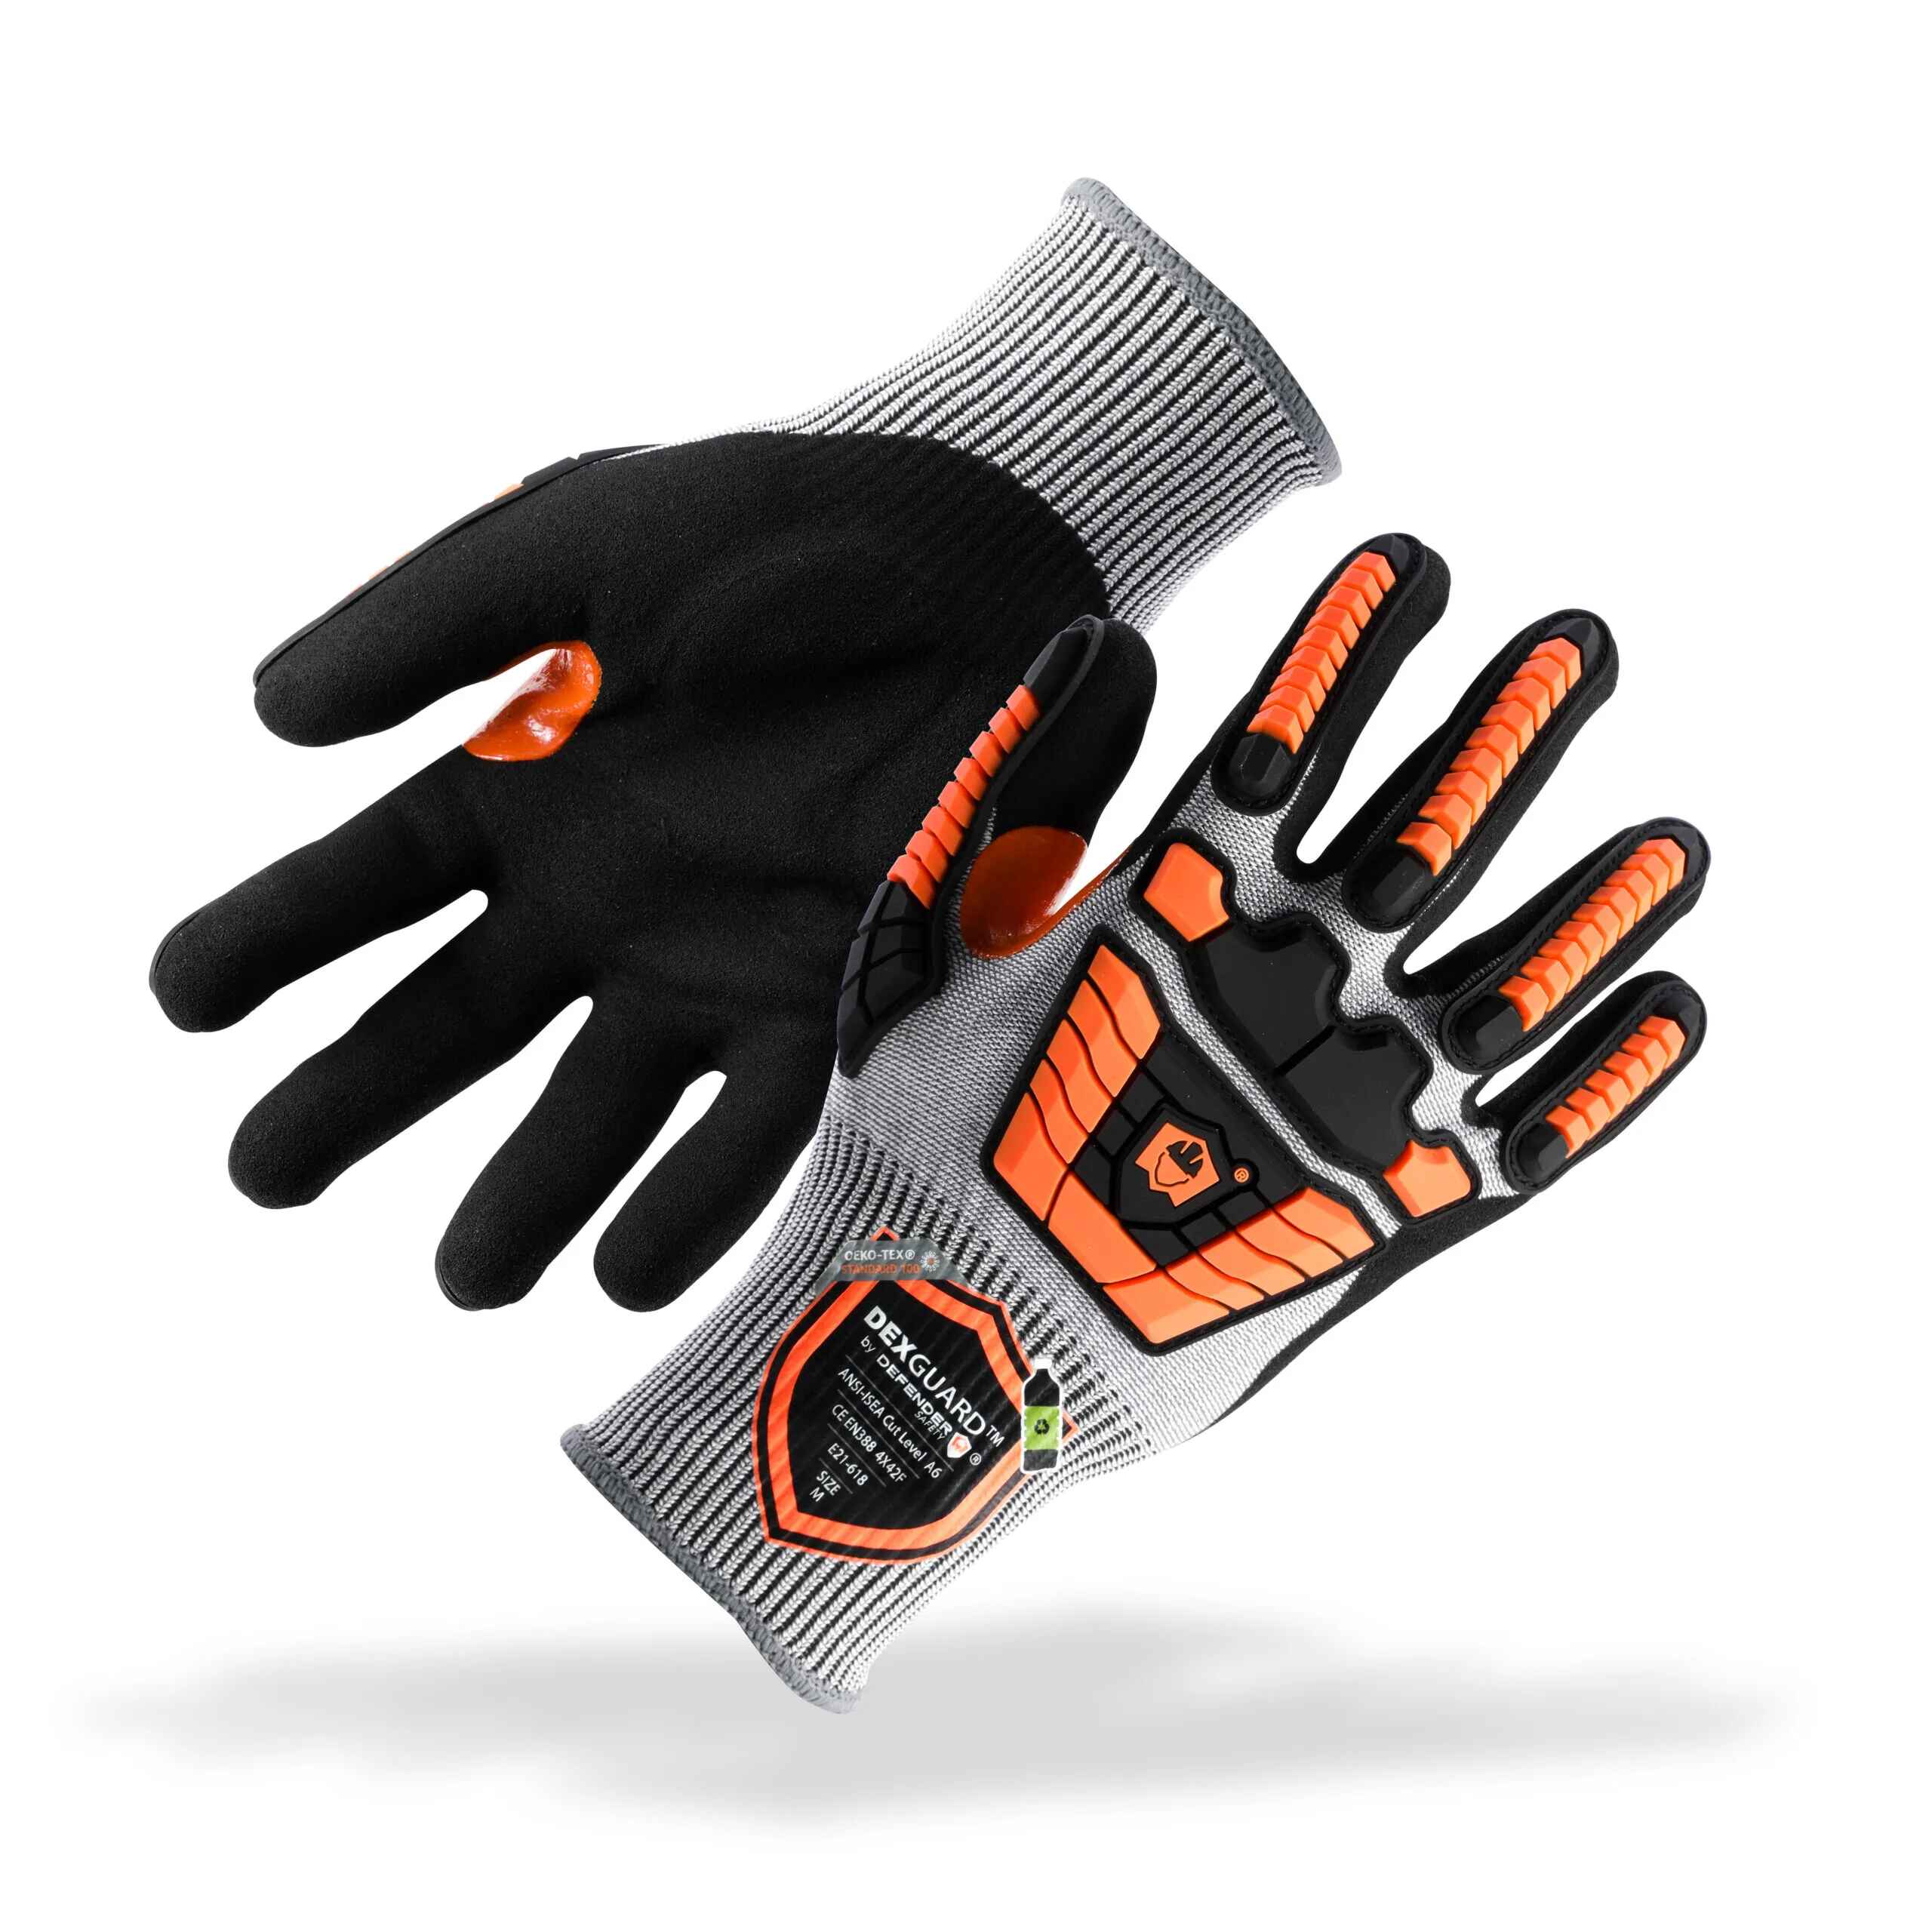 https://defendersafety.com/cdn/shop/products/dexguard-a6-cut-gloves-back-of-the-hand-impact-resistant-level-4-abrasion-resistant-textured-nitrile-coating-457803.jpg?v=1690825176&width=2560